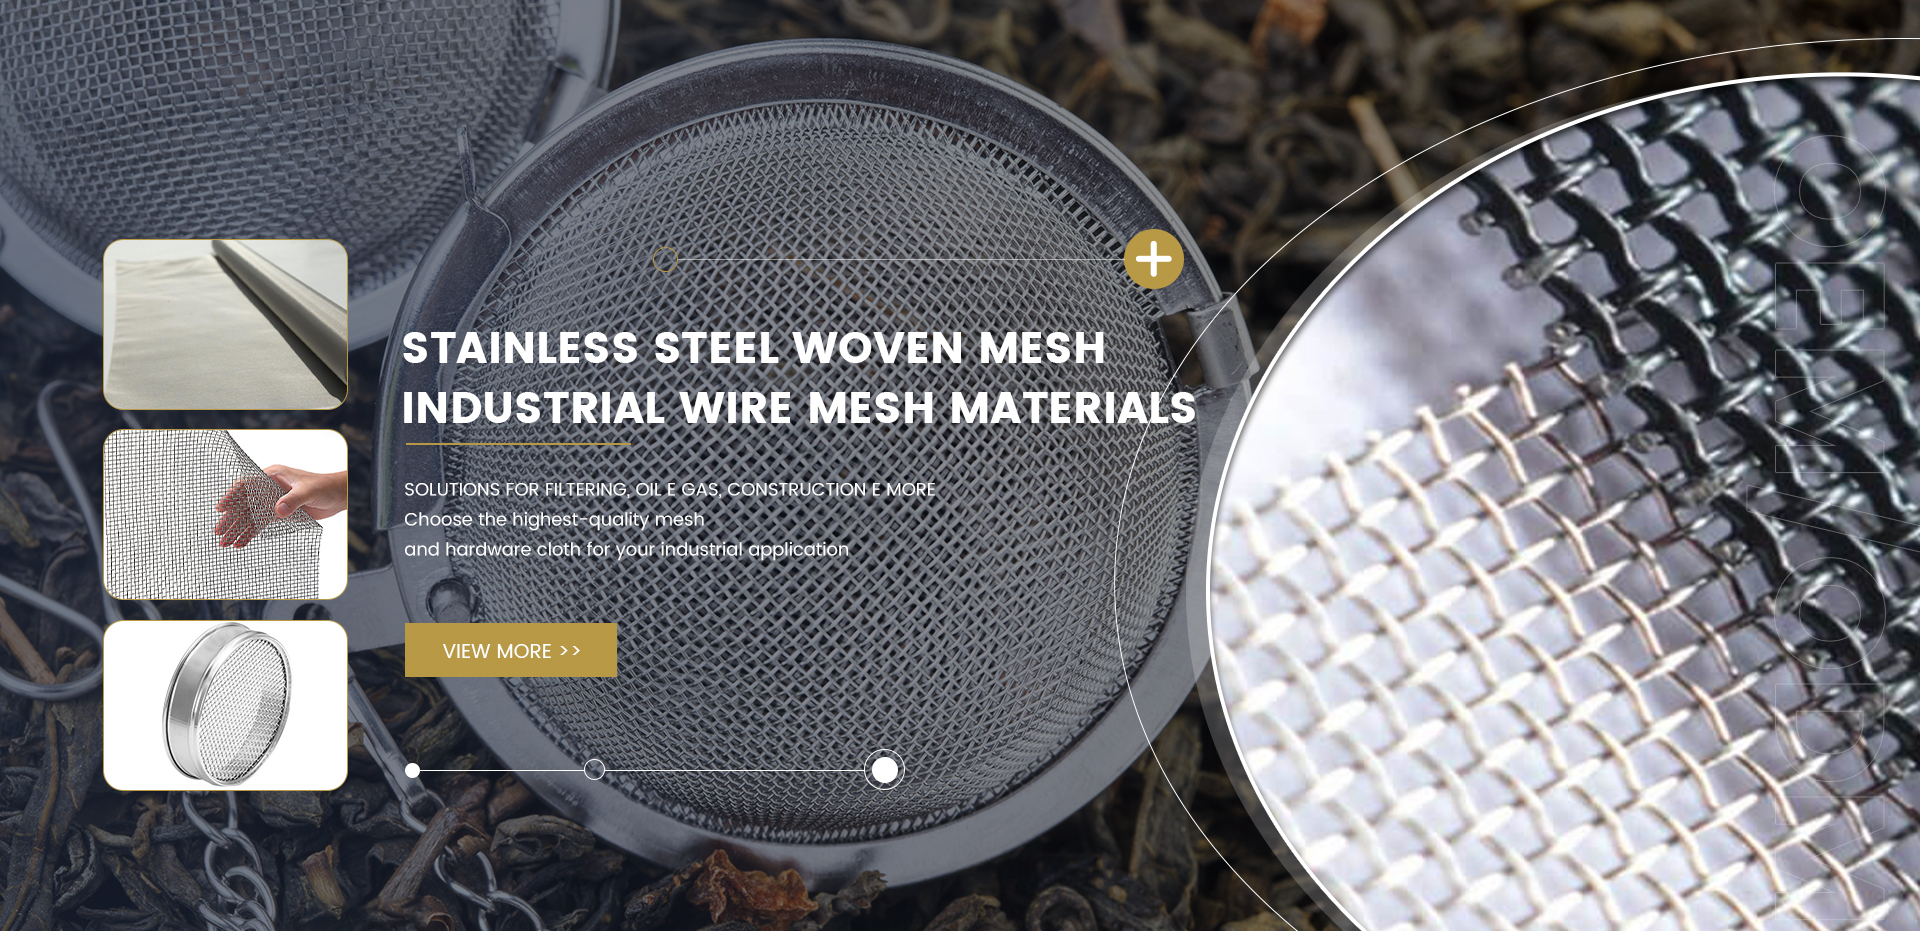 STAINLESS STEEL WOVEN MESH  INDUSTRIAL WIRE MESH MATERIALS